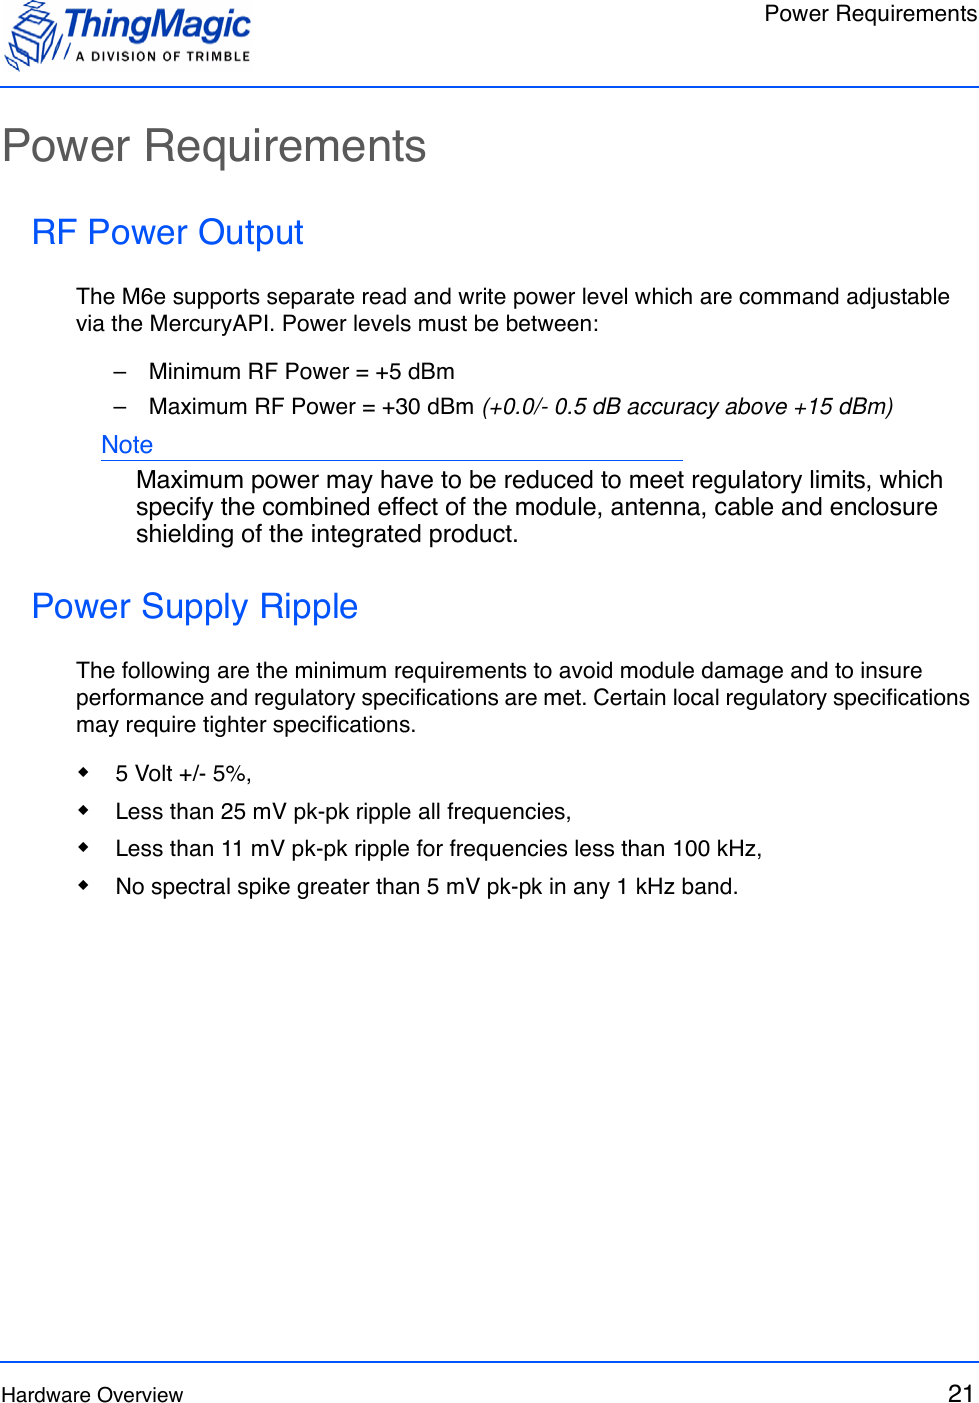 Power RequirementsHardware Overview 21Power RequirementsRF Power OutputThe M6e supports separate read and write power level which are command adjustable via the MercuryAPI. Power levels must be between:–   Minimum RF Power = +5 dBm–   Maximum RF Power = +30 dBm (+0.0/- 0.5 dB accuracy above +15 dBm)NoteMaximum power may have to be reduced to meet regulatory limits, which specify the combined effect of the module, antenna, cable and enclosure shielding of the integrated product.Power Supply RippleThe following are the minimum requirements to avoid module damage and to insure performance and regulatory specifications are met. Certain local regulatory specifications may require tighter specifications. 5 Volt +/- 5%, Less than 25 mV pk-pk ripple all frequencies, Less than 11 mV pk-pk ripple for frequencies less than 100 kHz, No spectral spike greater than 5 mV pk-pk in any 1 kHz band.